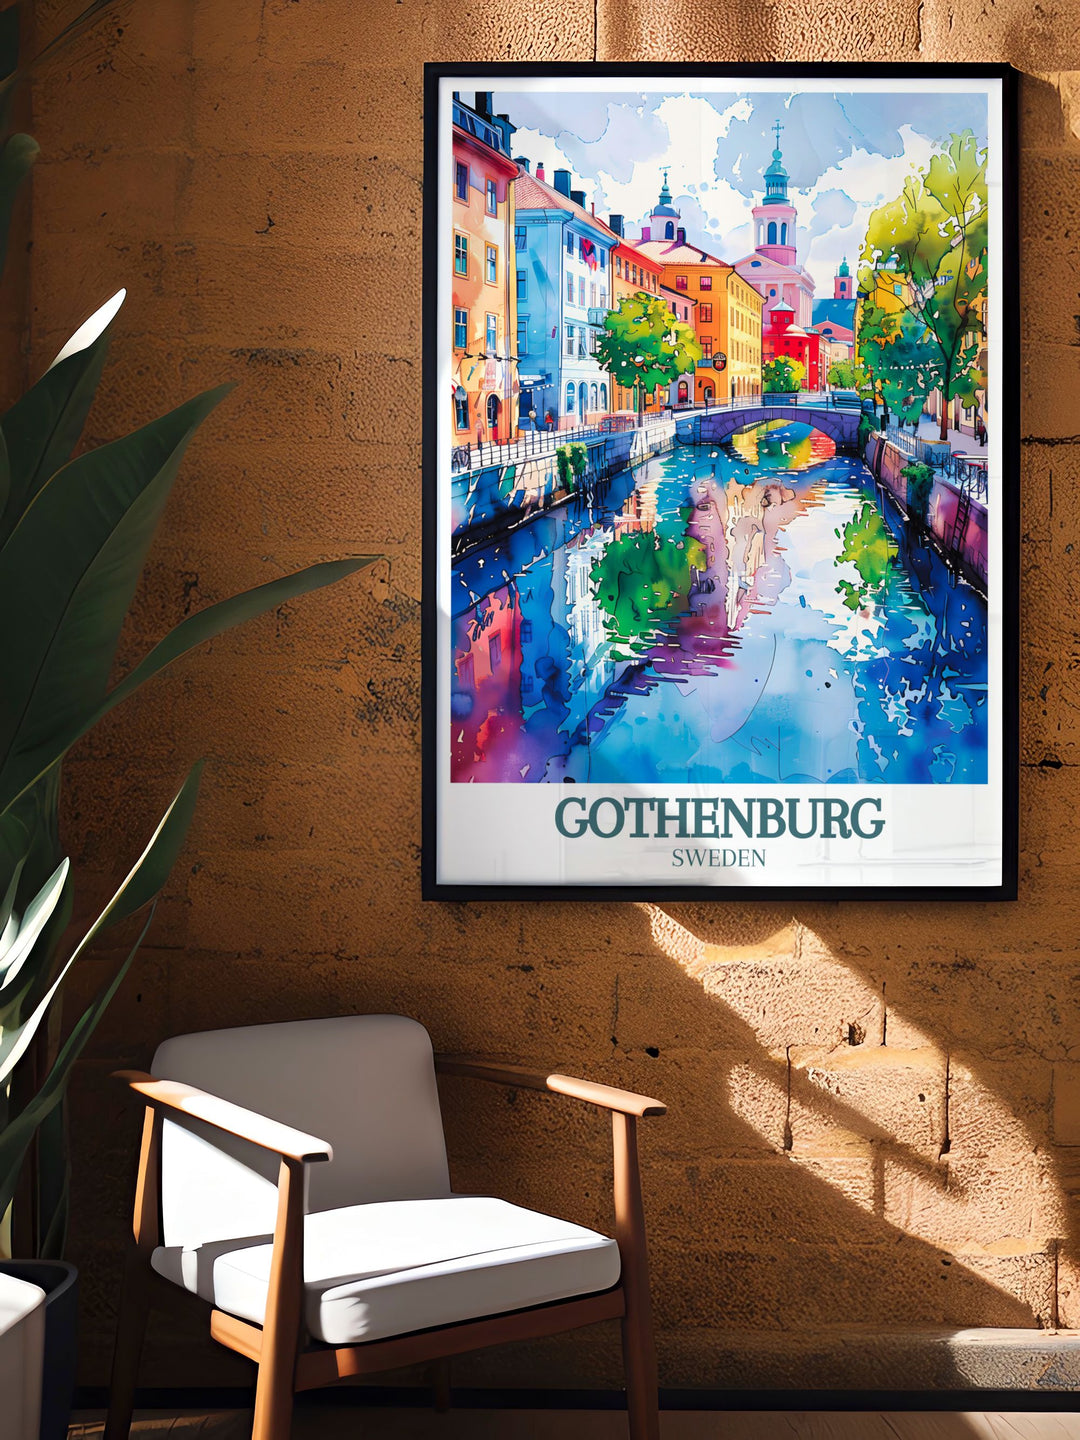 Featuring the serene canals of Gothenburg, this travel poster highlights the citys tranquil waterways and picturesque surroundings. Ideal for those who appreciate peaceful urban landscapes, this artwork brings the calming beauty of Gothenburgs canals into your living space.